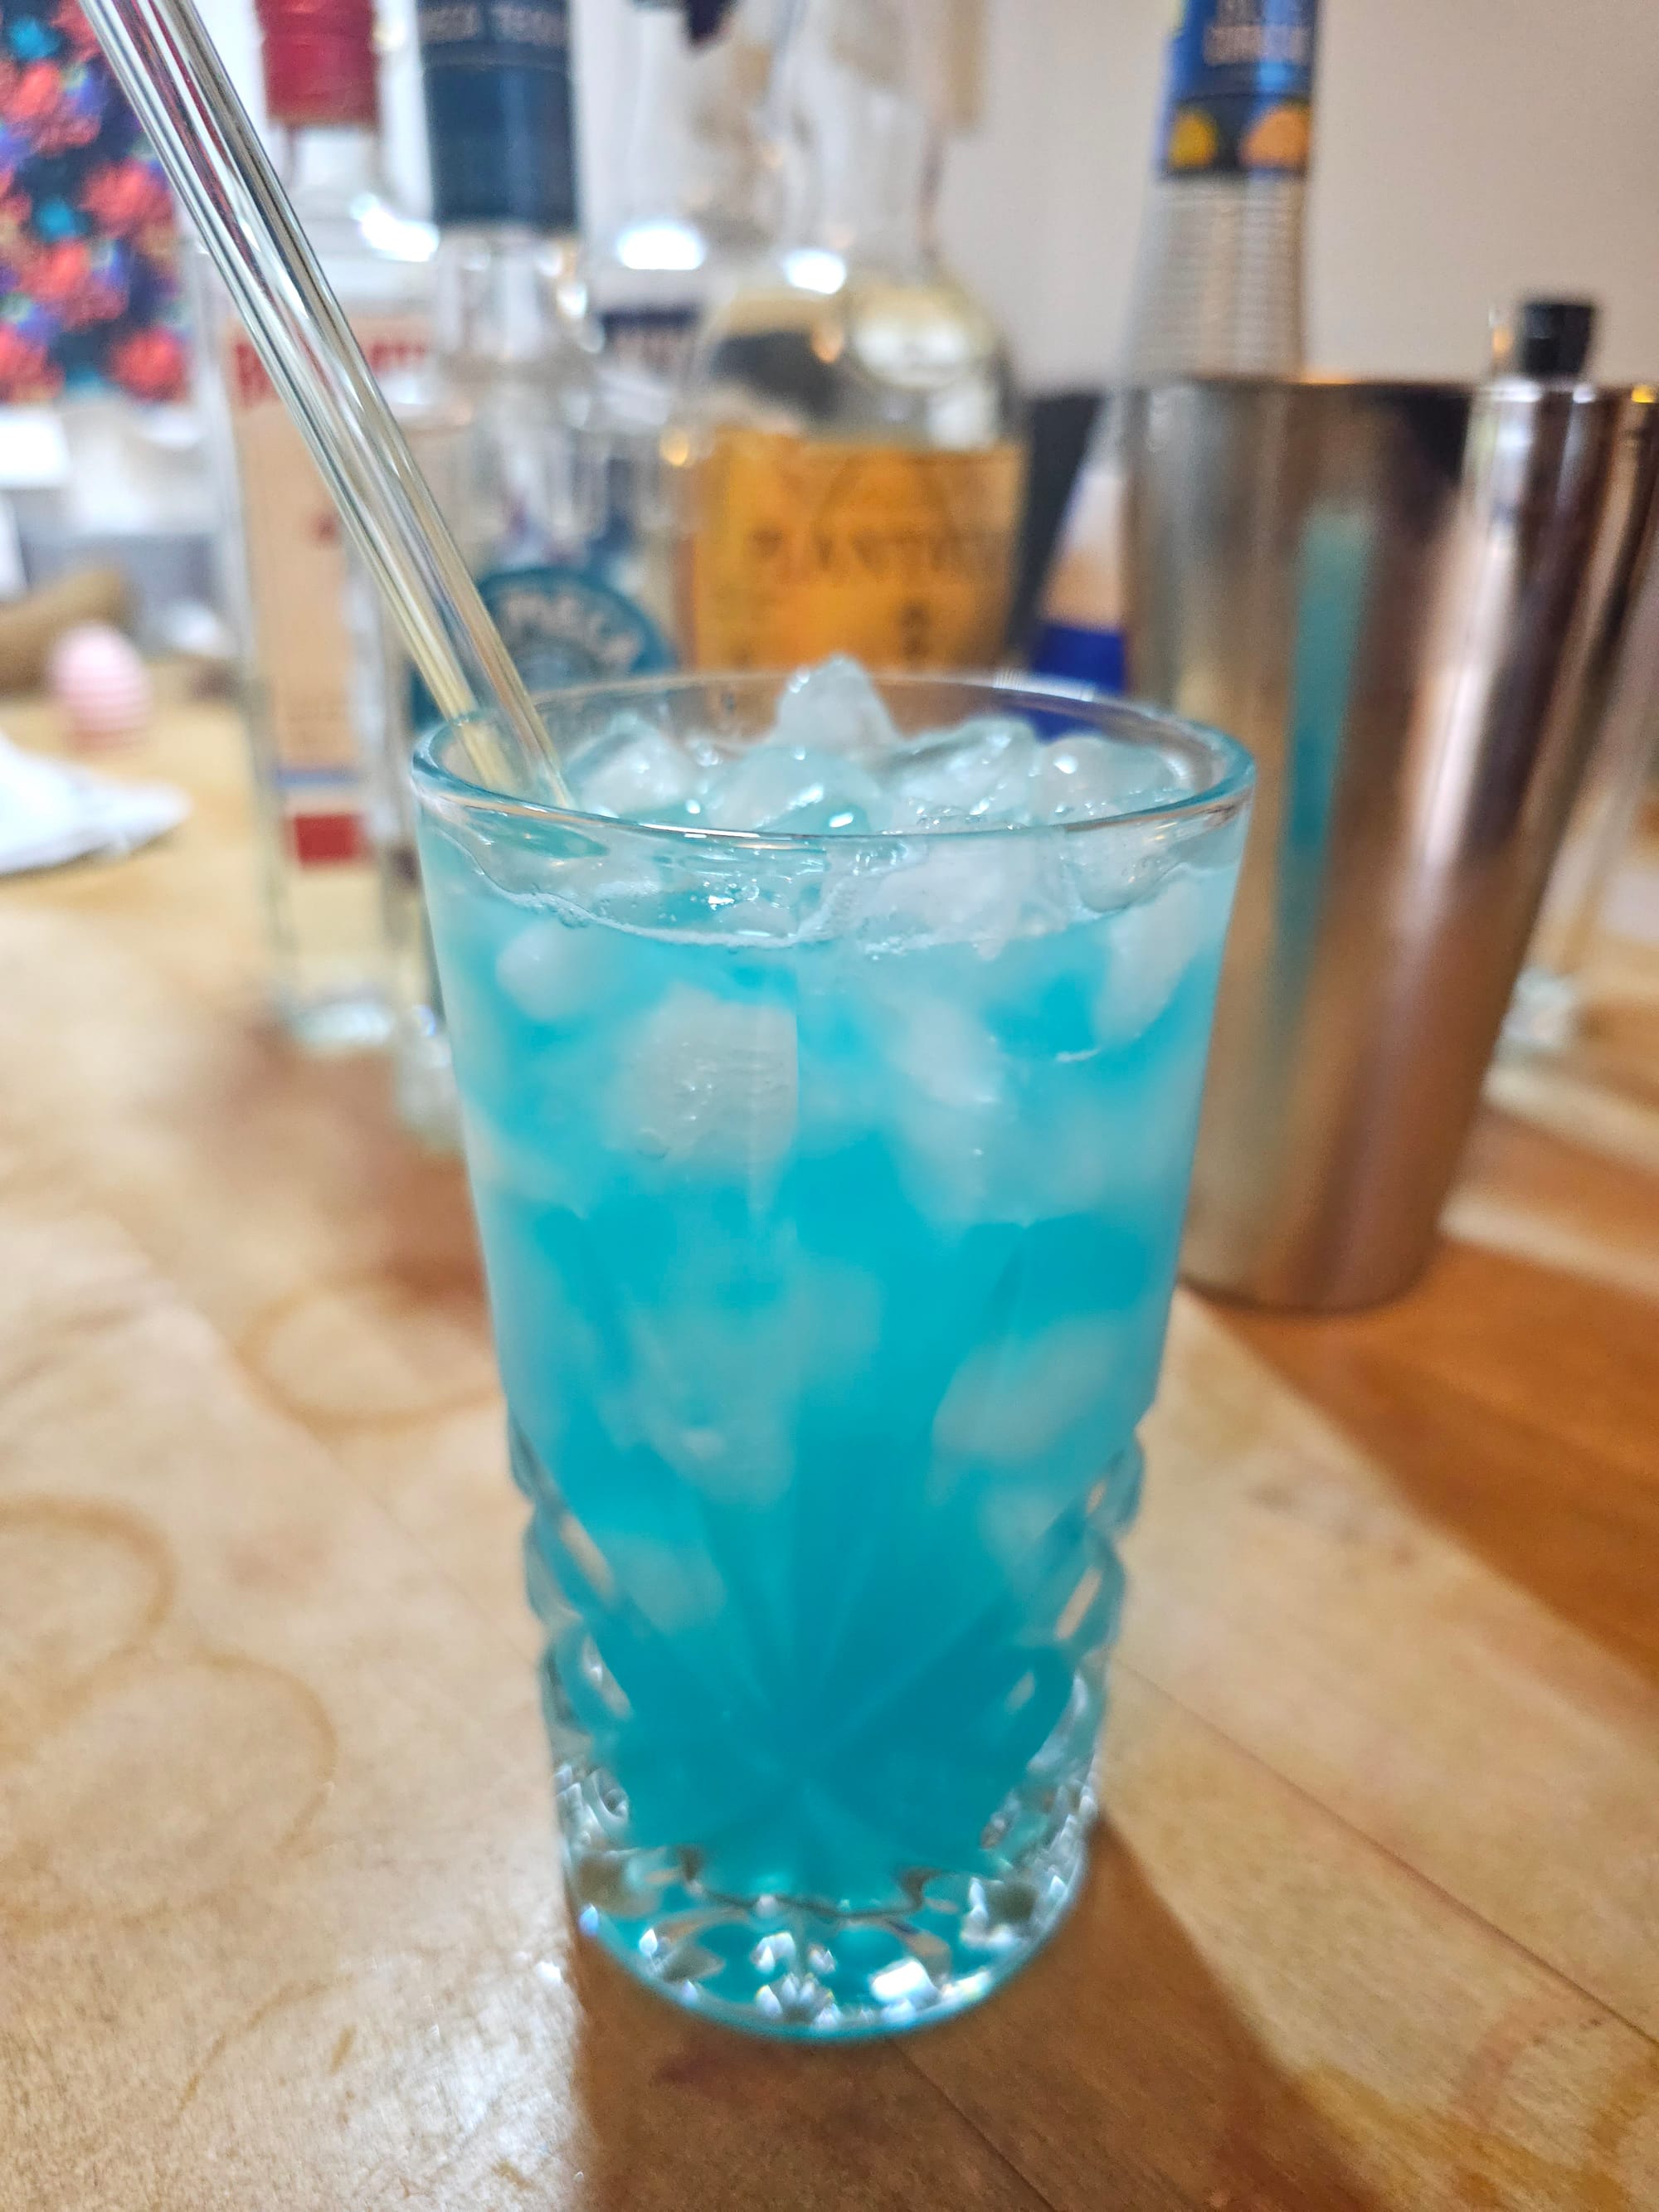 A longdrink glass filled with a blueish liquid and ice. In the background cocktail paraphernalia and bottles. 